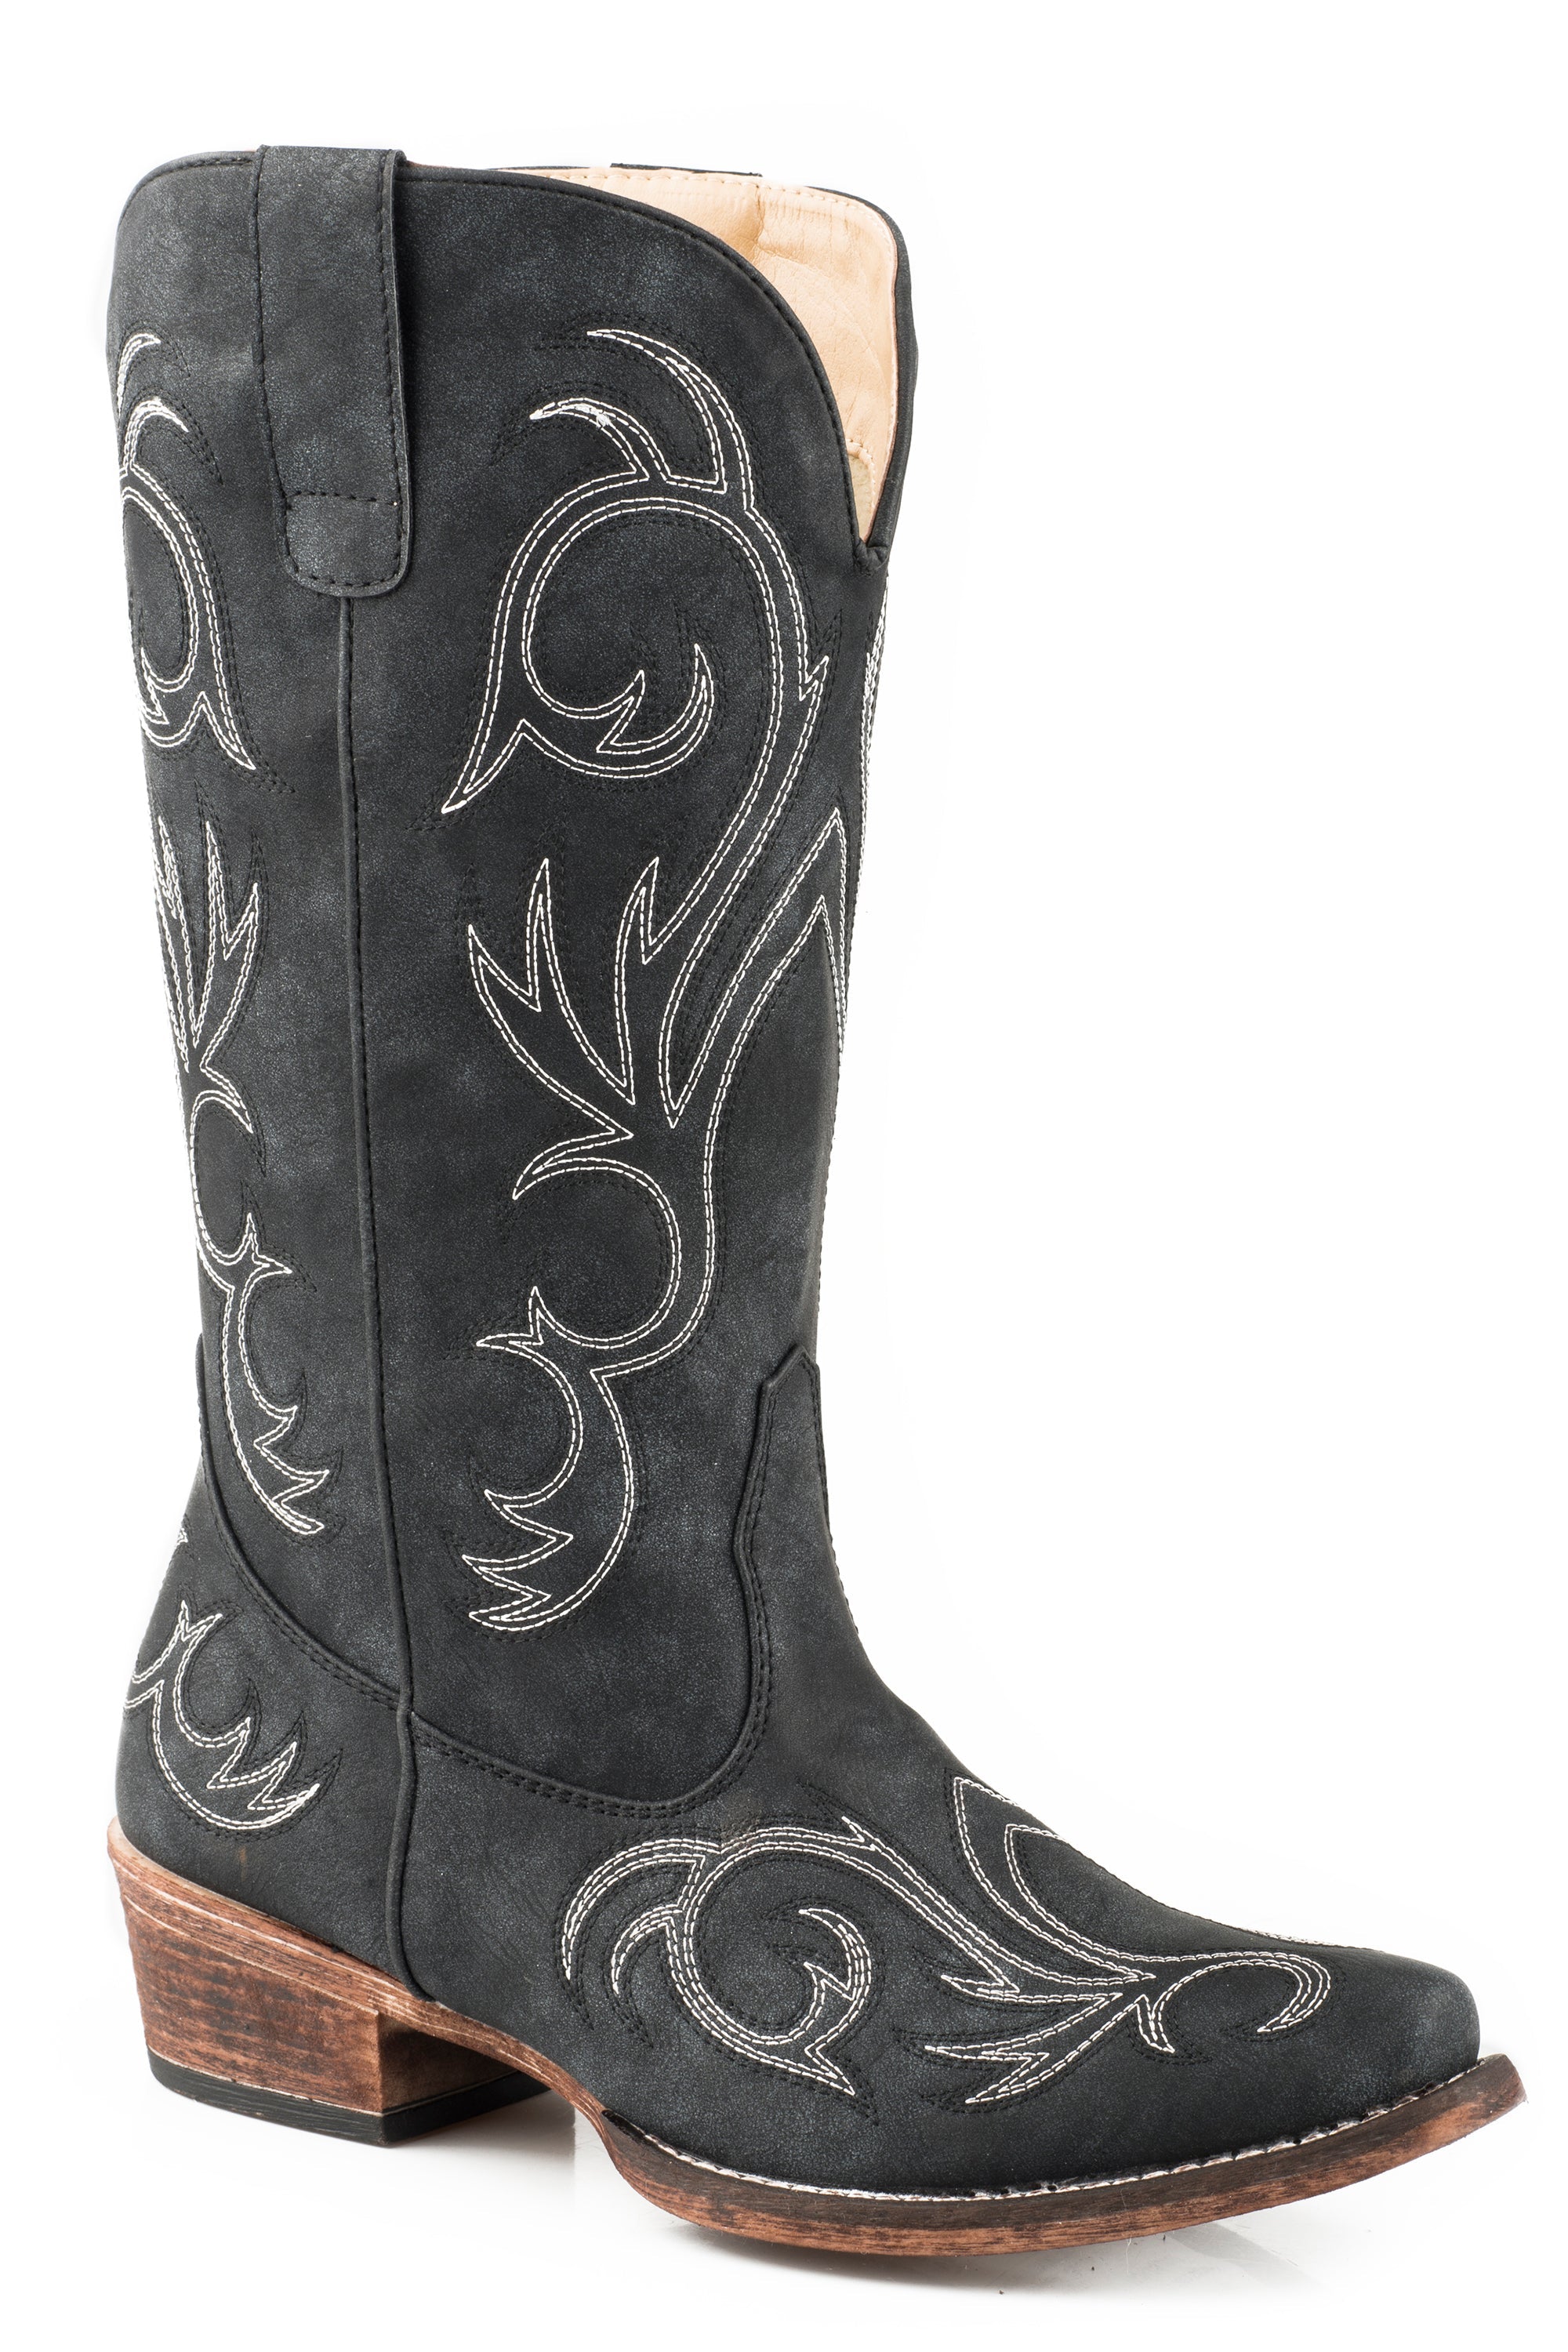 Roper Womens Fashion Cowboy Boot Black Faux Leather And All Over Embroidery